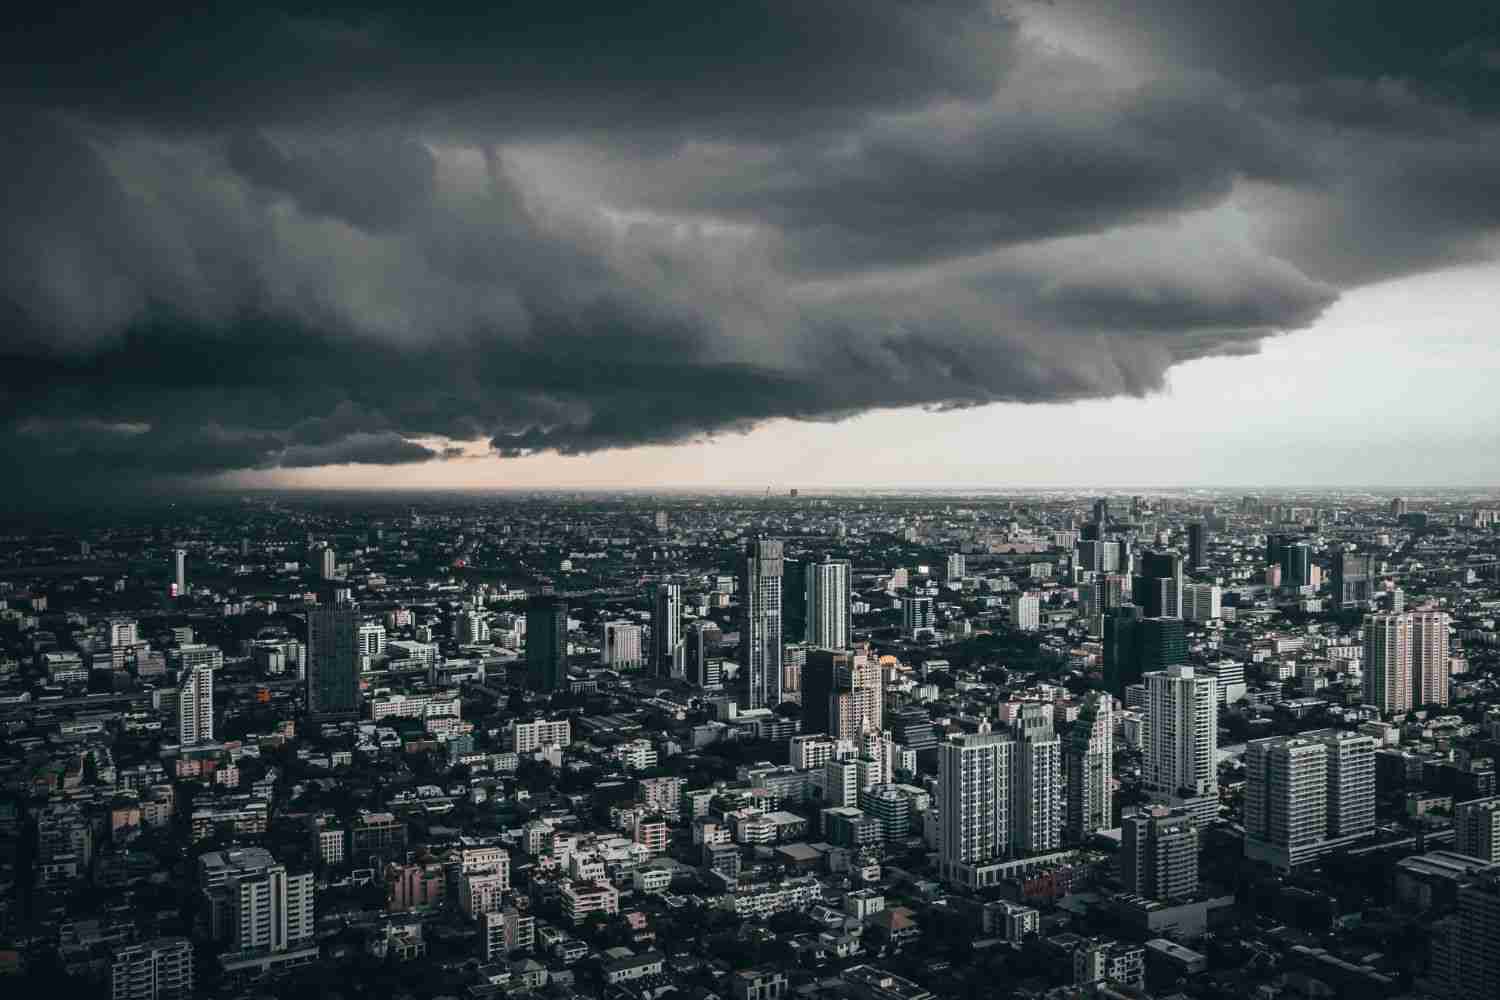 Dark clouds spread throughout the city